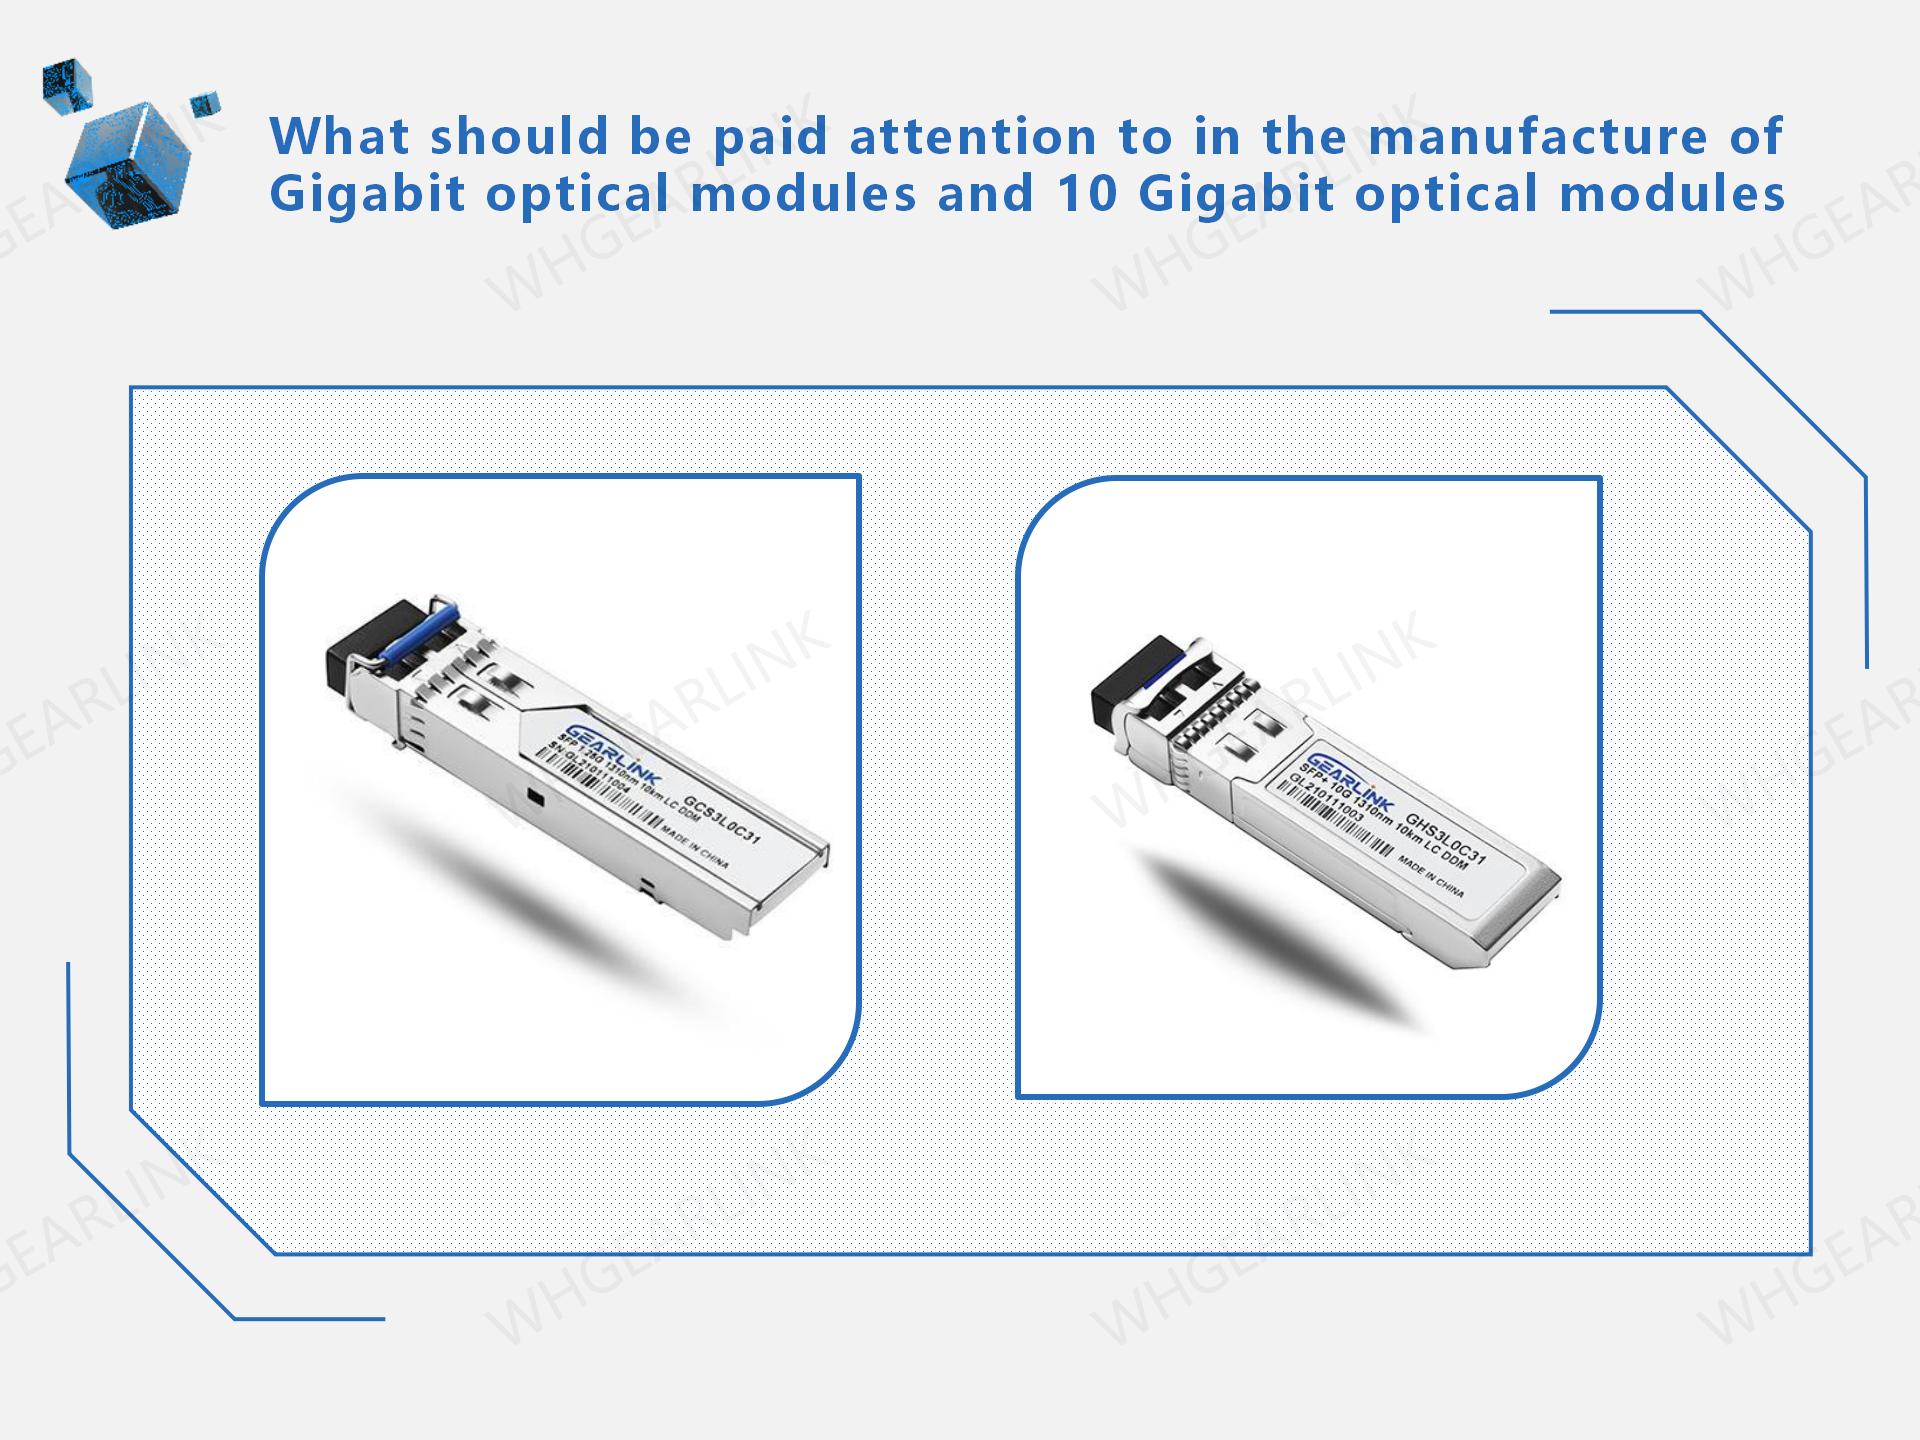 What should be paid attention to in the manufacture of Gigabit optical modules and 10 Gigabit optical modules